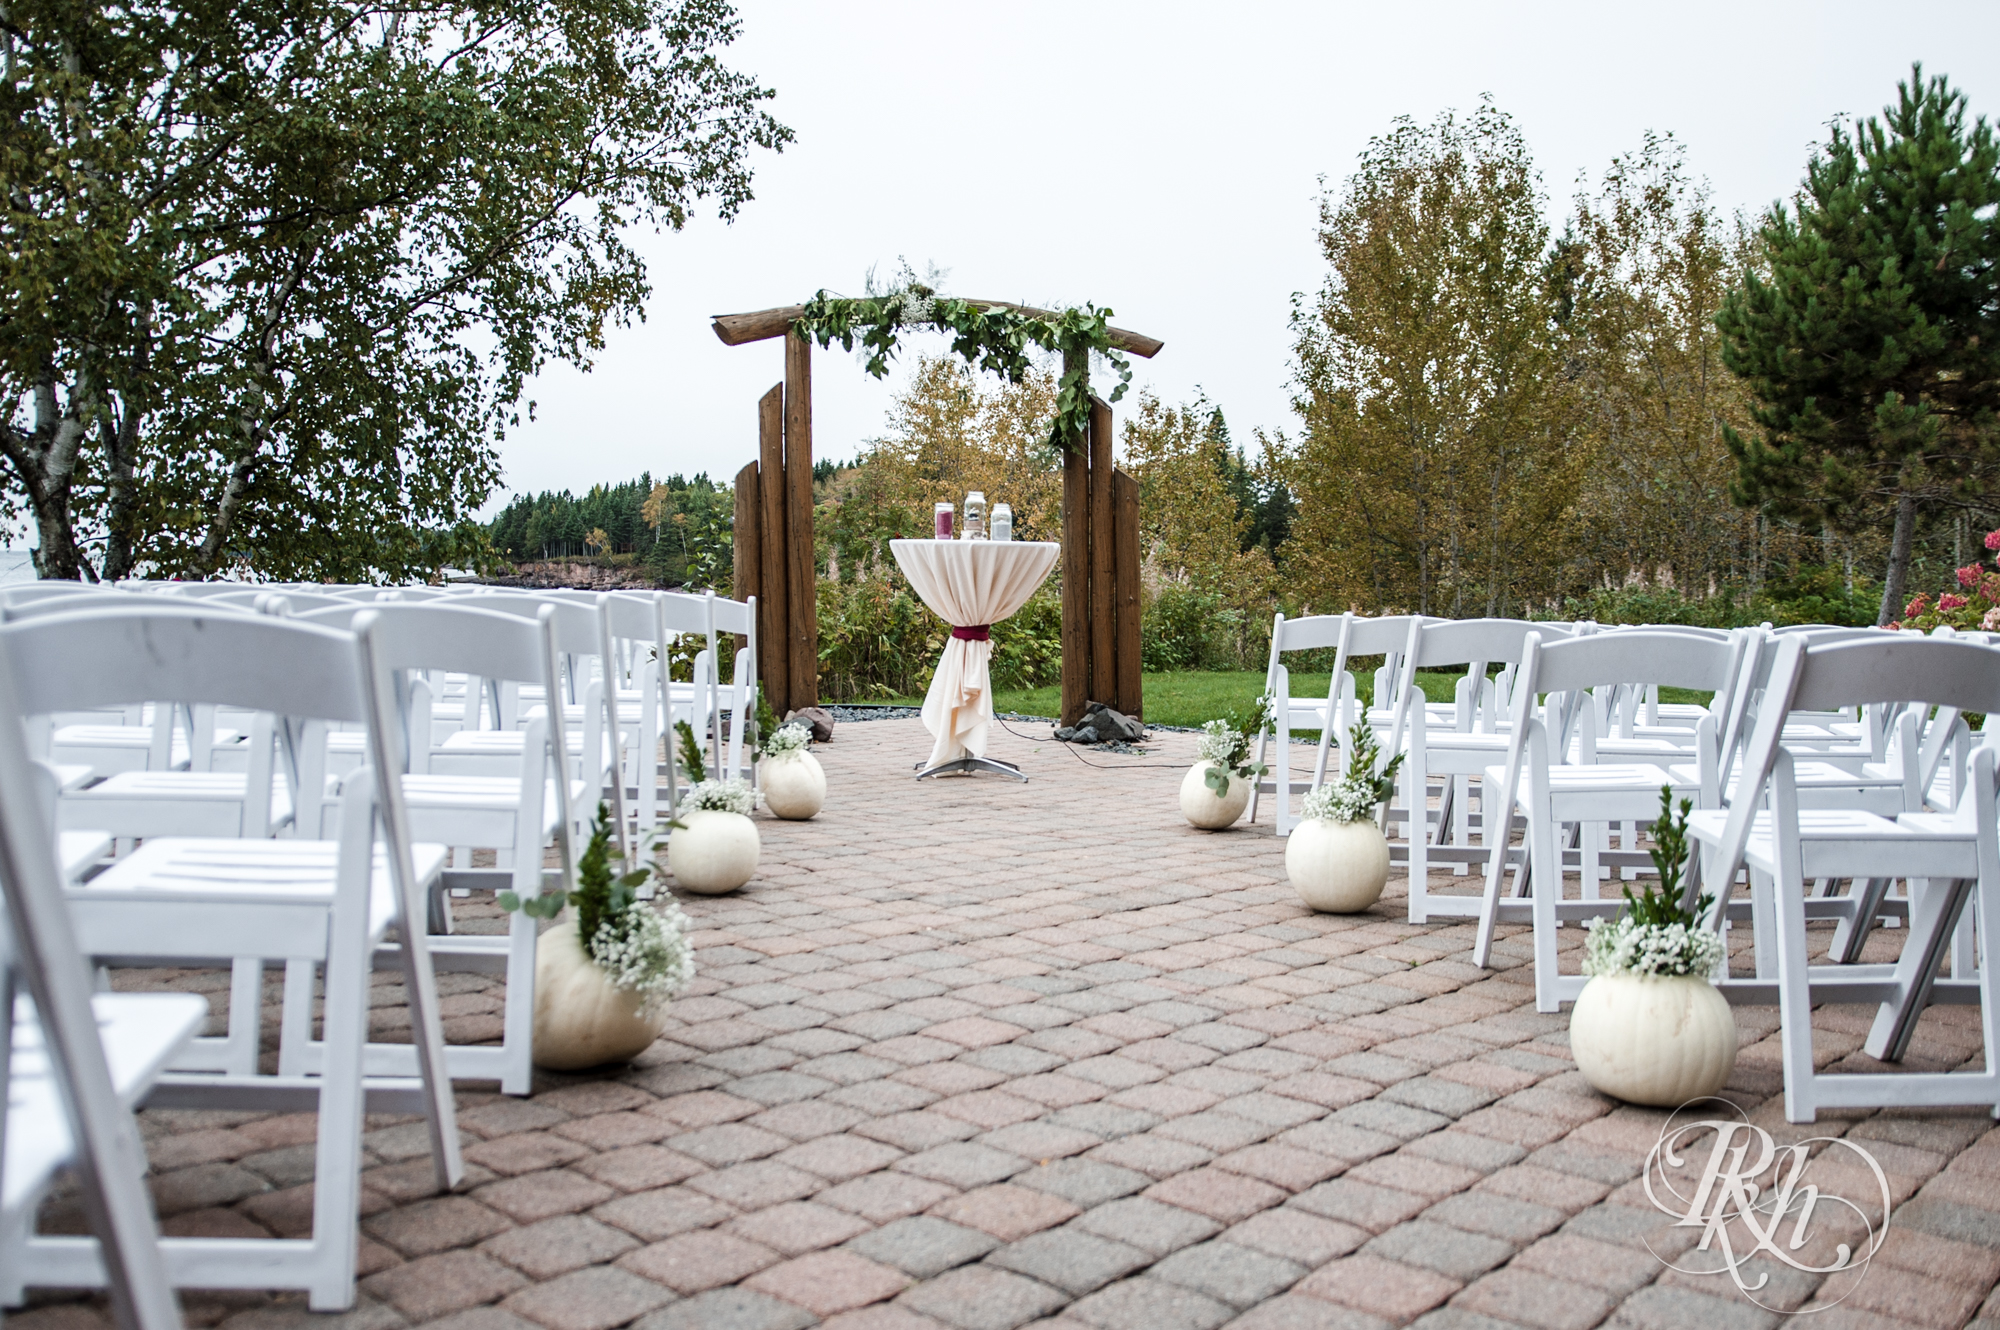 Outdoor fall wedding ceremony setup at Grand Superior Lodge in Two Harbors, Minnesota.